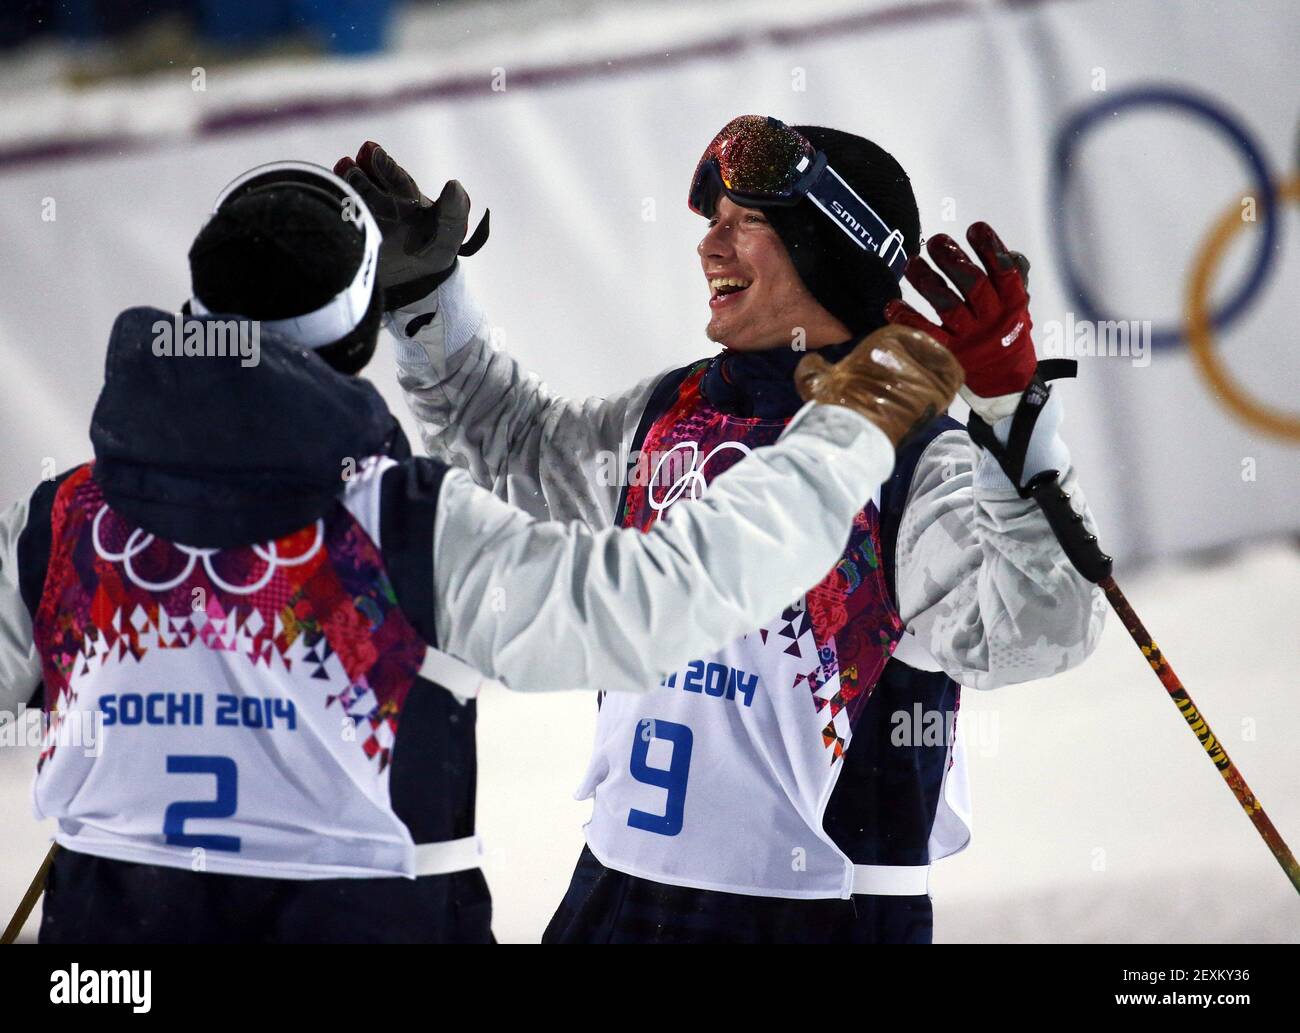 David Wise (right) of the USA celebrates winning the gold medal in men's ski halfpipe at Rosa Khutor Extreme Park during the Winter Olympics in Sochi, Russia, Tuesday, Feb. 18, 2014. (Photo by Brian Cassella/Chicago Tribune/MCT/Sipa USA) Stock Photo